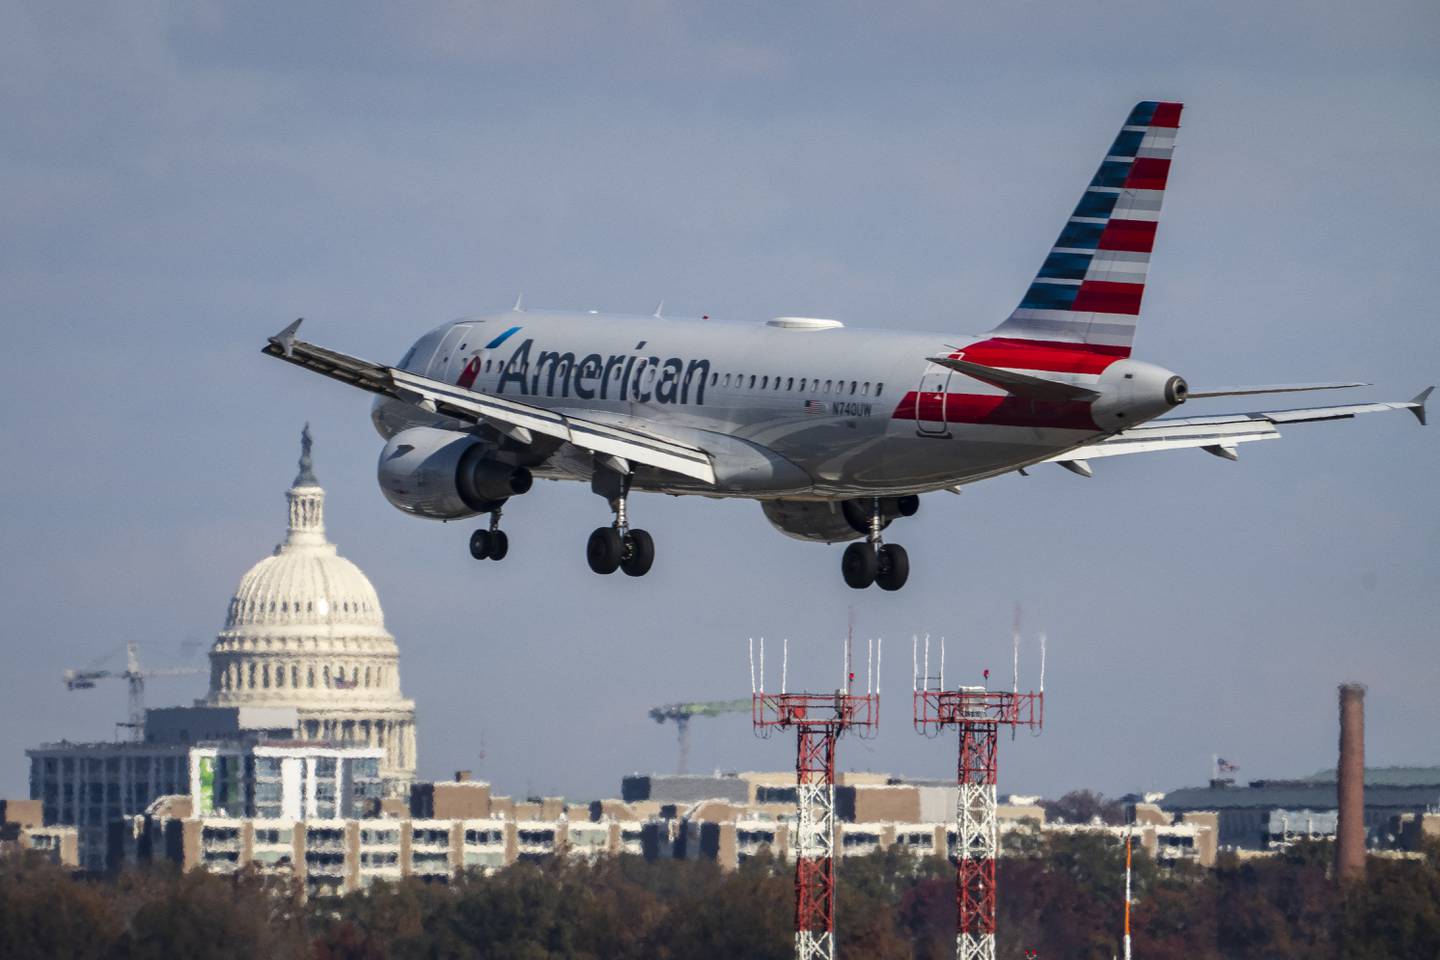 Travellers flying to the US should reconfirm their flight status before travel due to delays and cancellations amid 5G network rollouts. Getty Images via AFP